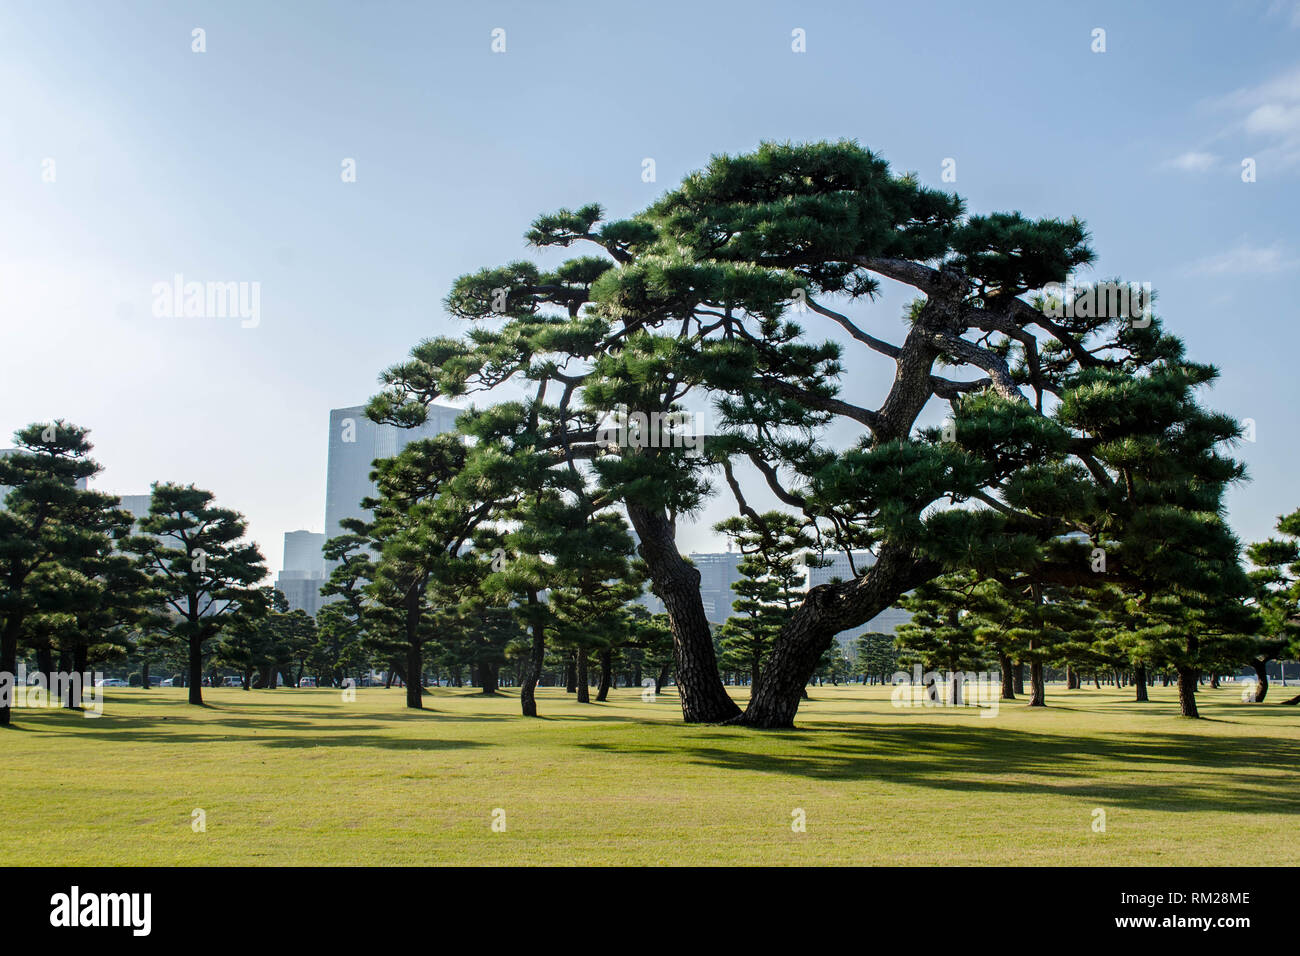 Japanese Black Pines on the grassy lawn of the Imperial Palace, Tokyo, Japan. The skyline of Tokyo can be seen in the background. Stock Photo